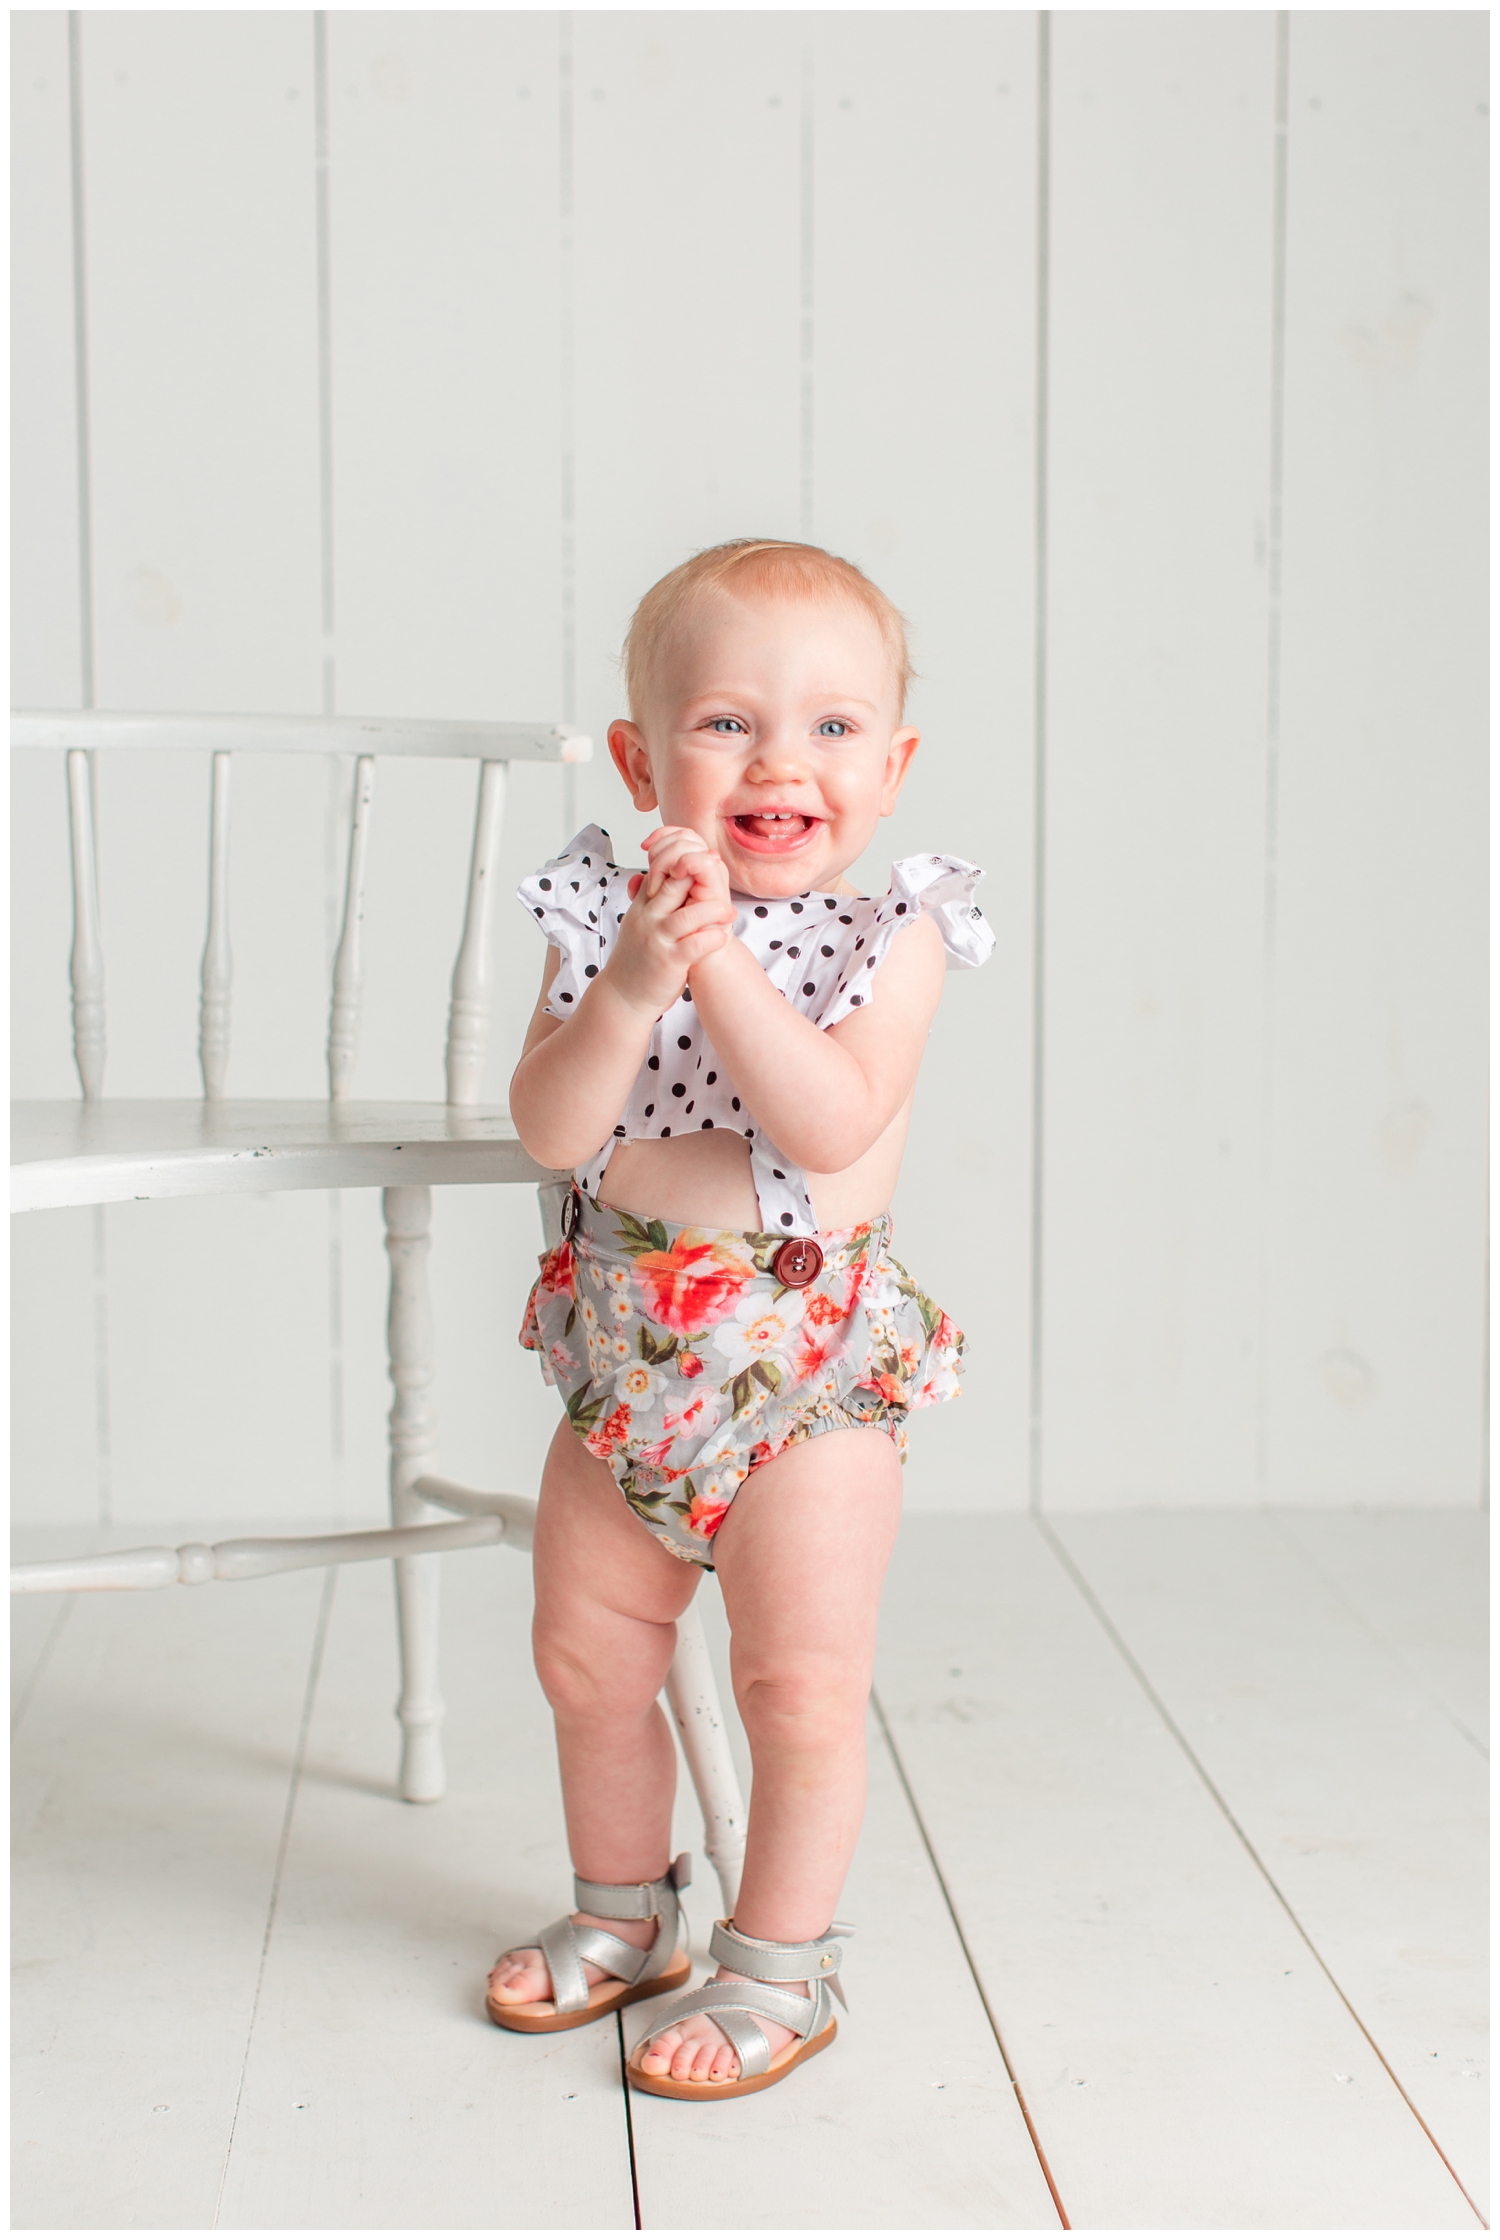 One year old baby girl standing on a white wood background wearing a floral and polka dot romper, smiling and clasping her hands | Iowa Baby Photographer | CB Studio